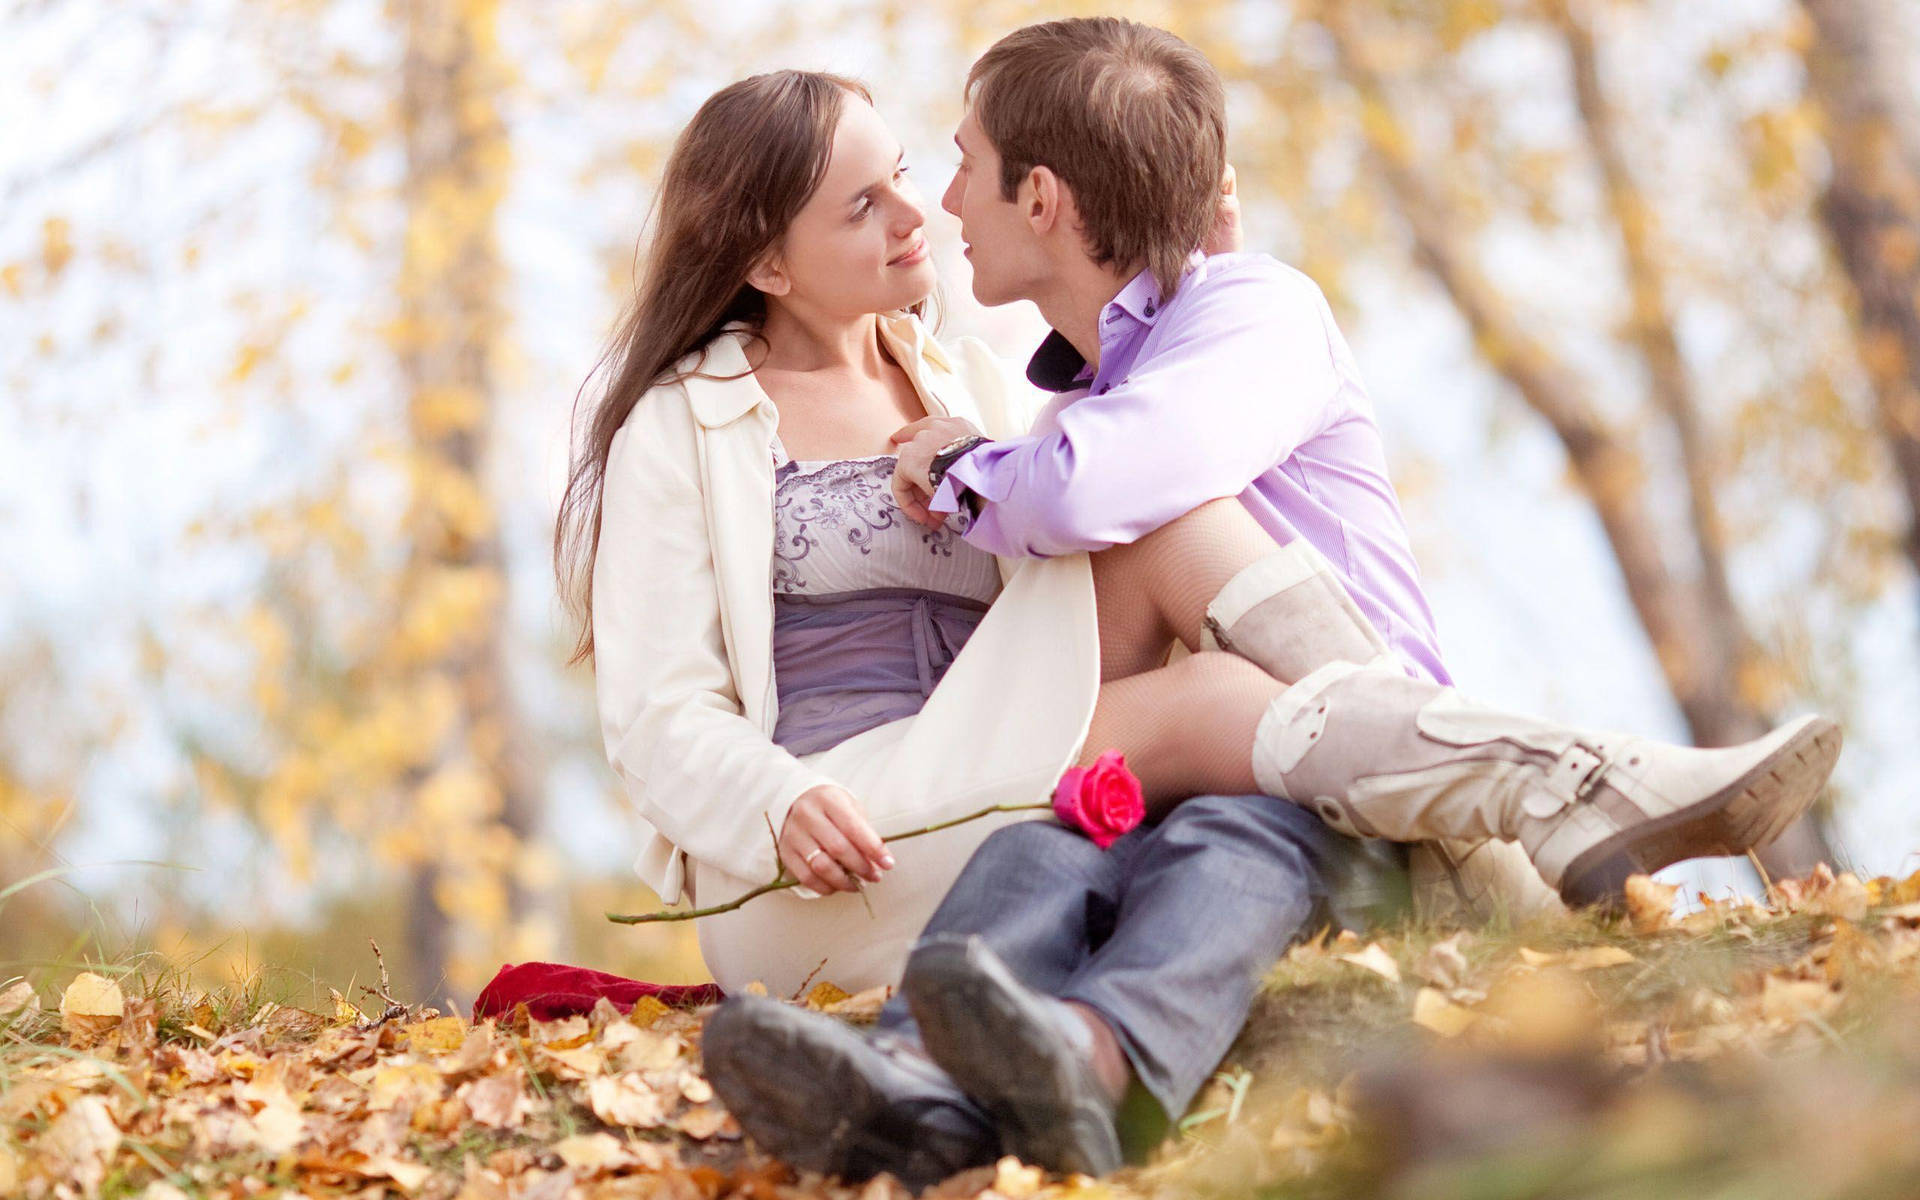 Romantic Couples During Fall Season Background